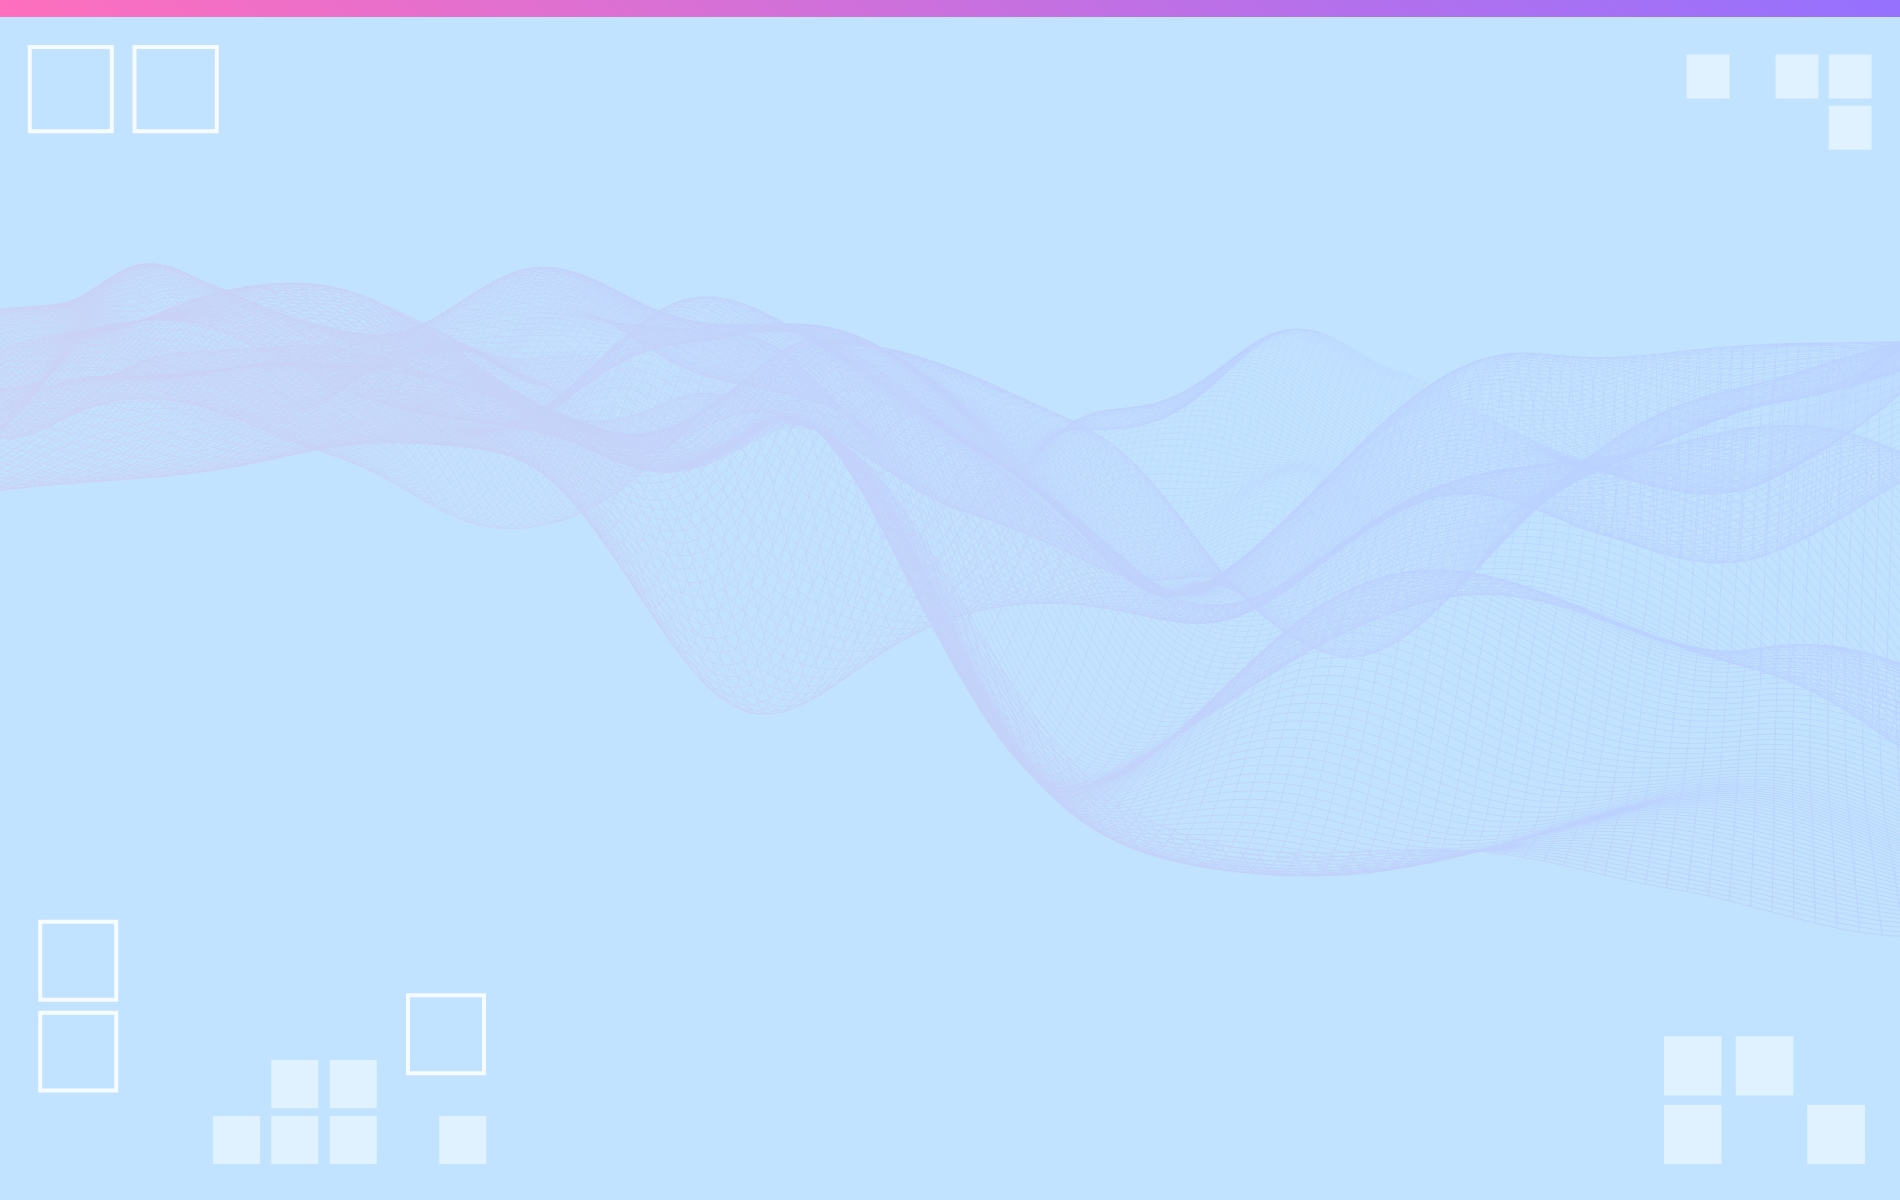 Light Blue Background With Purple Waves and White Squares